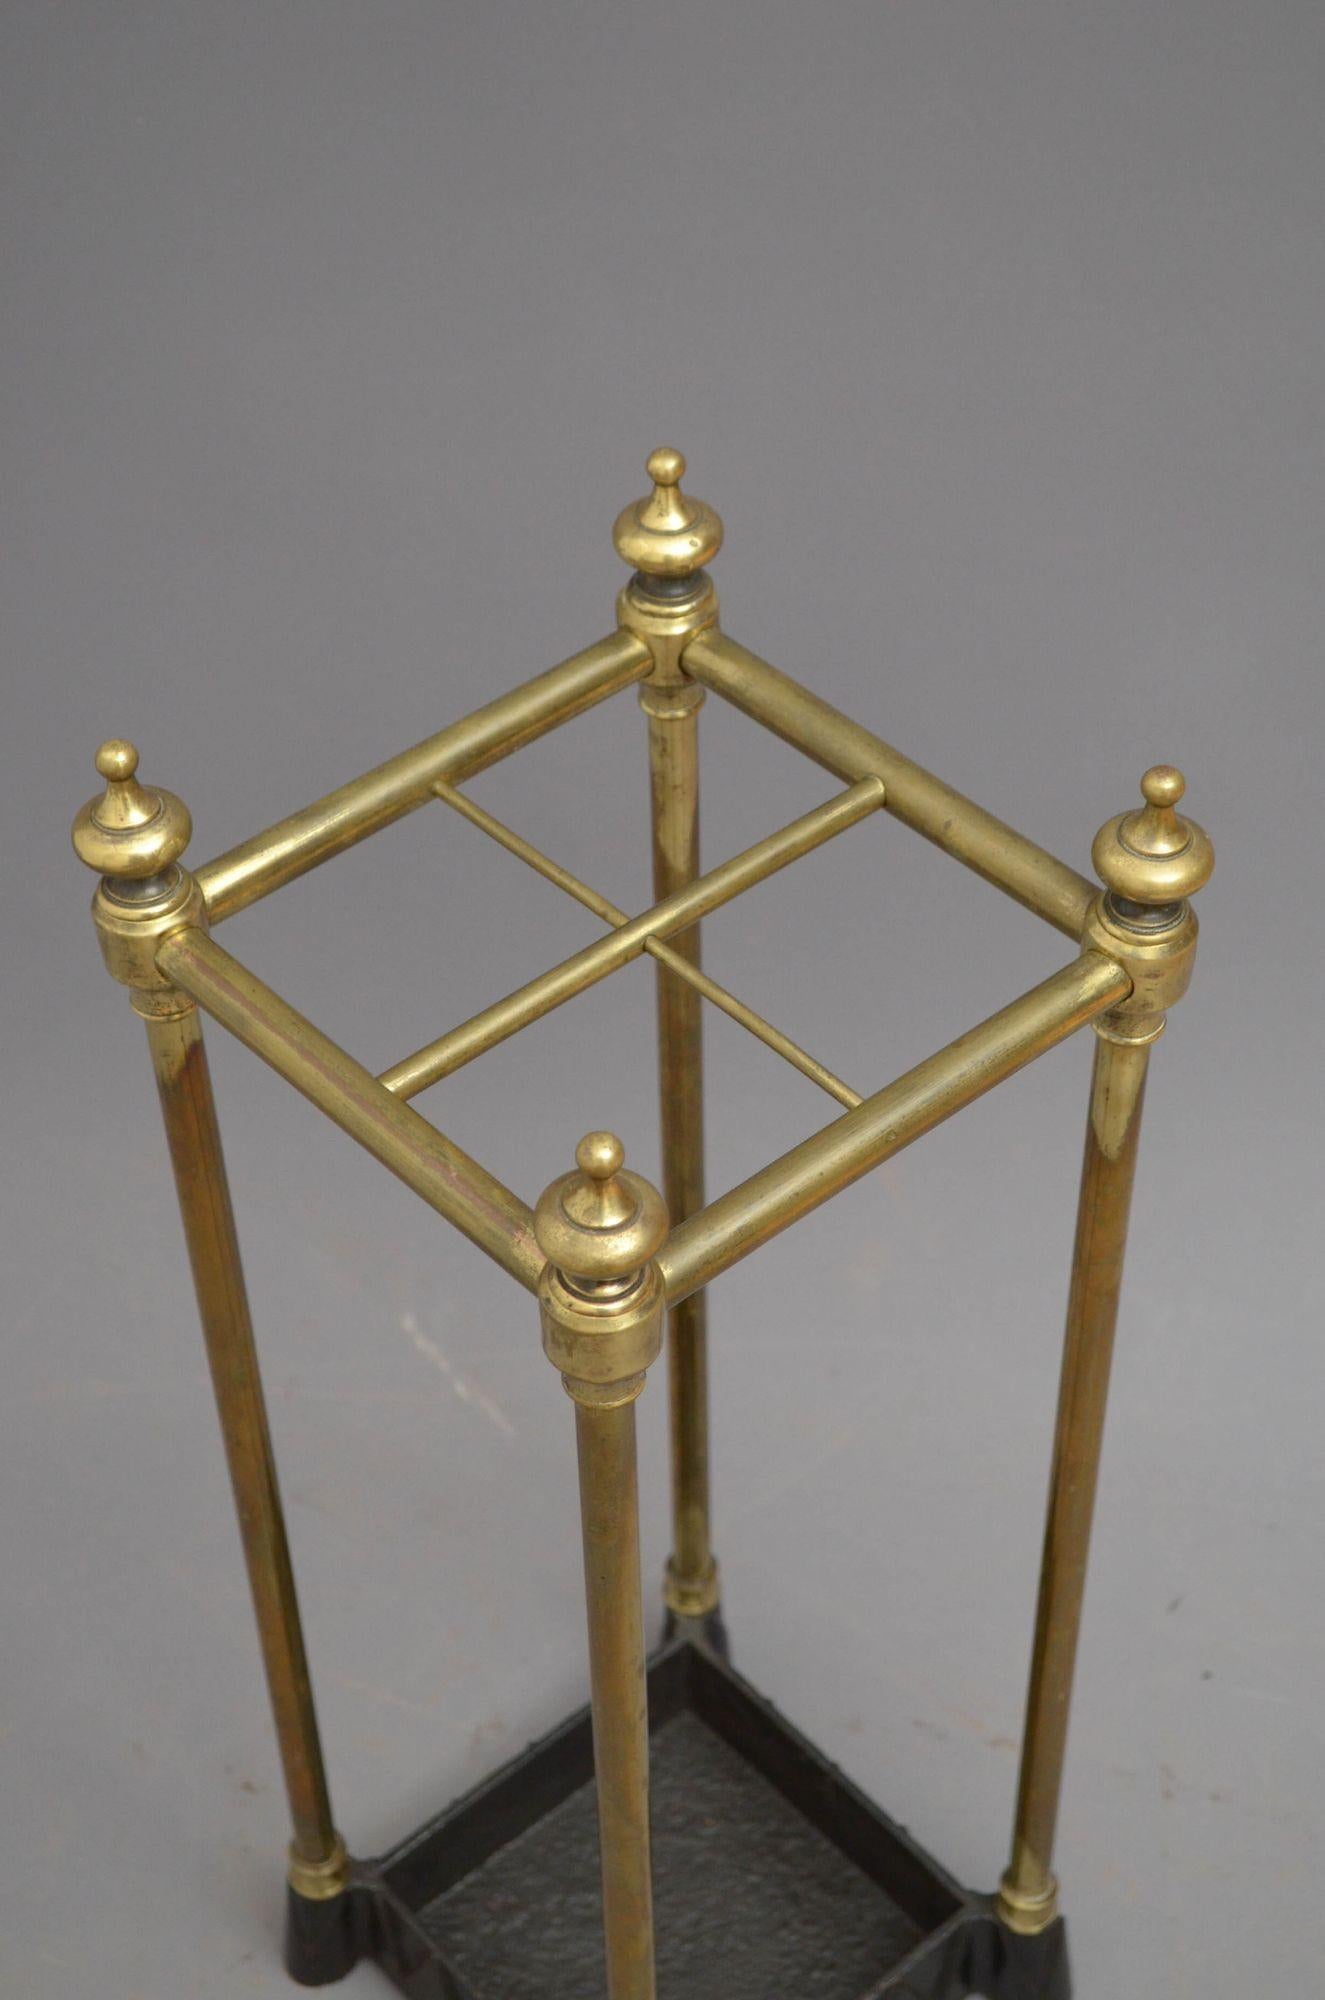 R011 Edwardian brass umbrella stand with four divisions, finials and drip tray with dog tooth decoration. This antique umbrella stand retains its original patina, all in home ready condition. Can be polished on request. c1900
H24.5